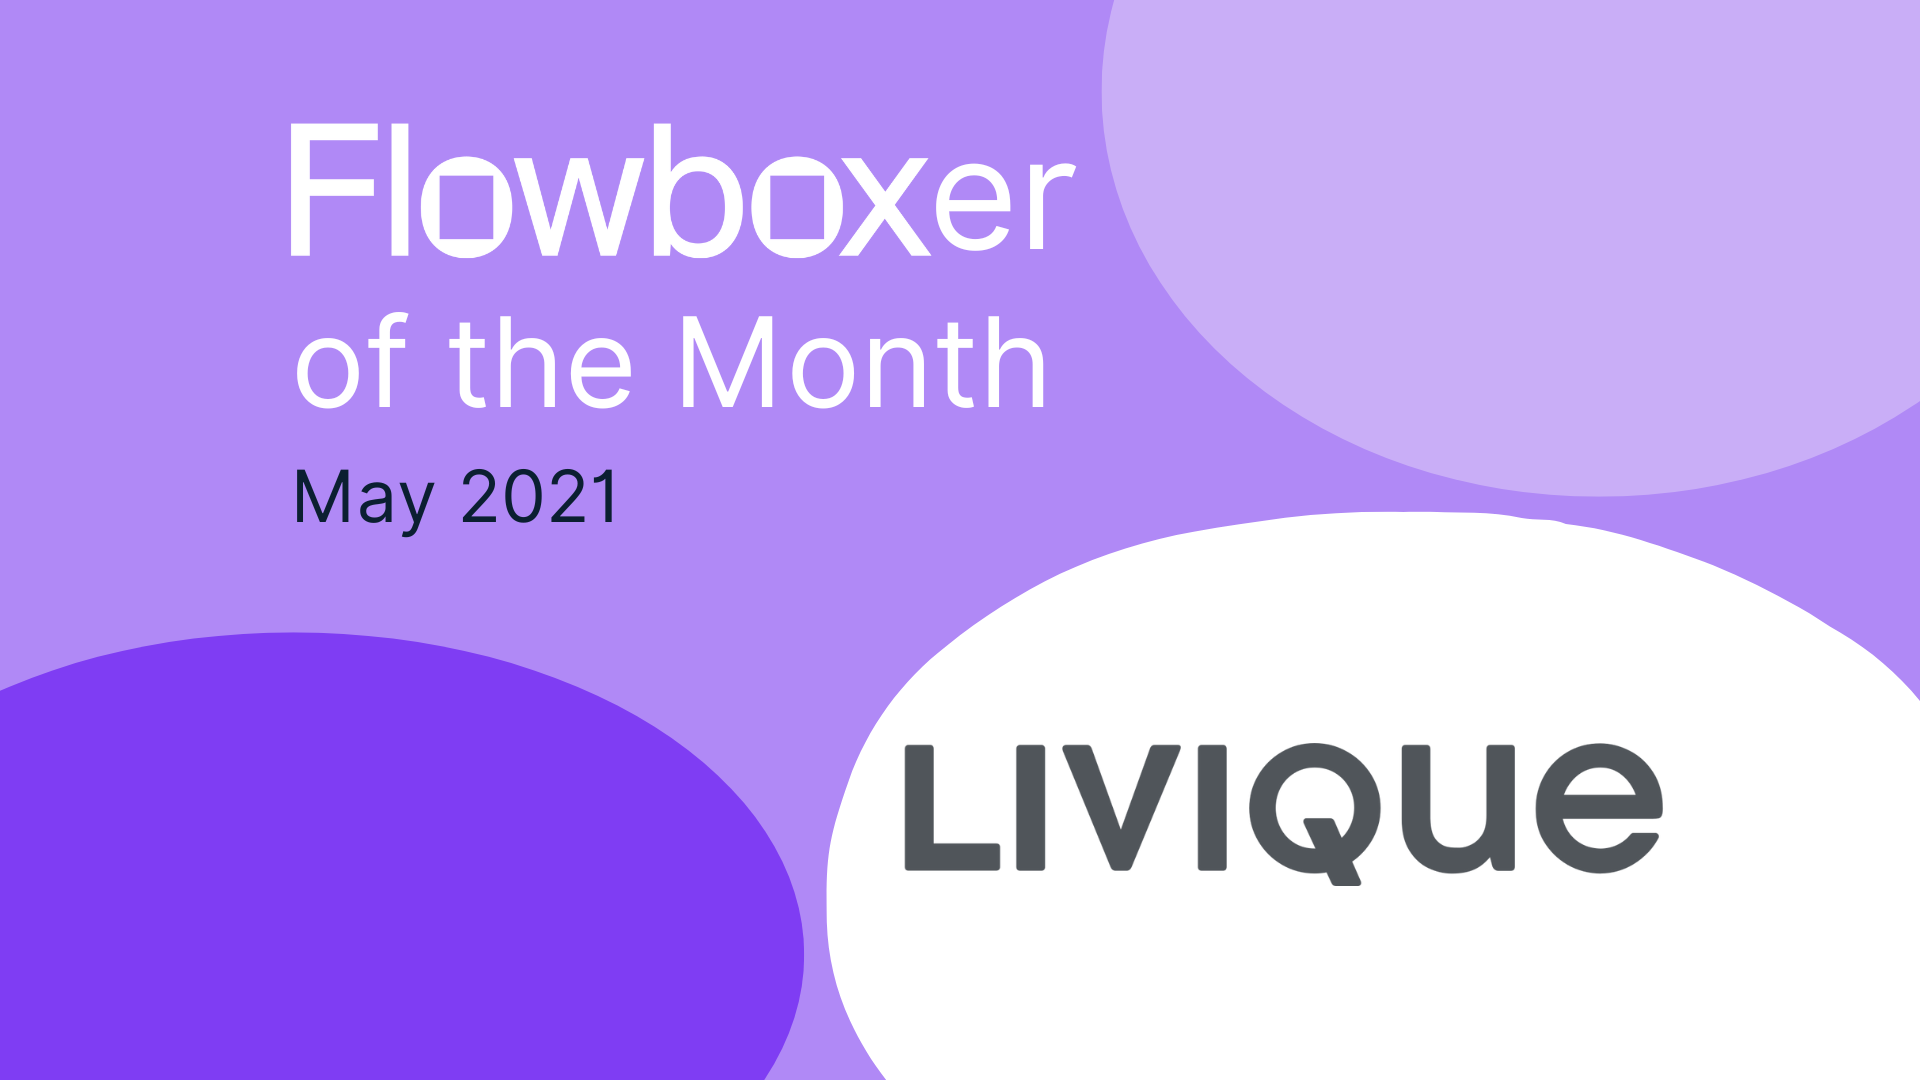 Flowboxer of the month – May 2021: Livique